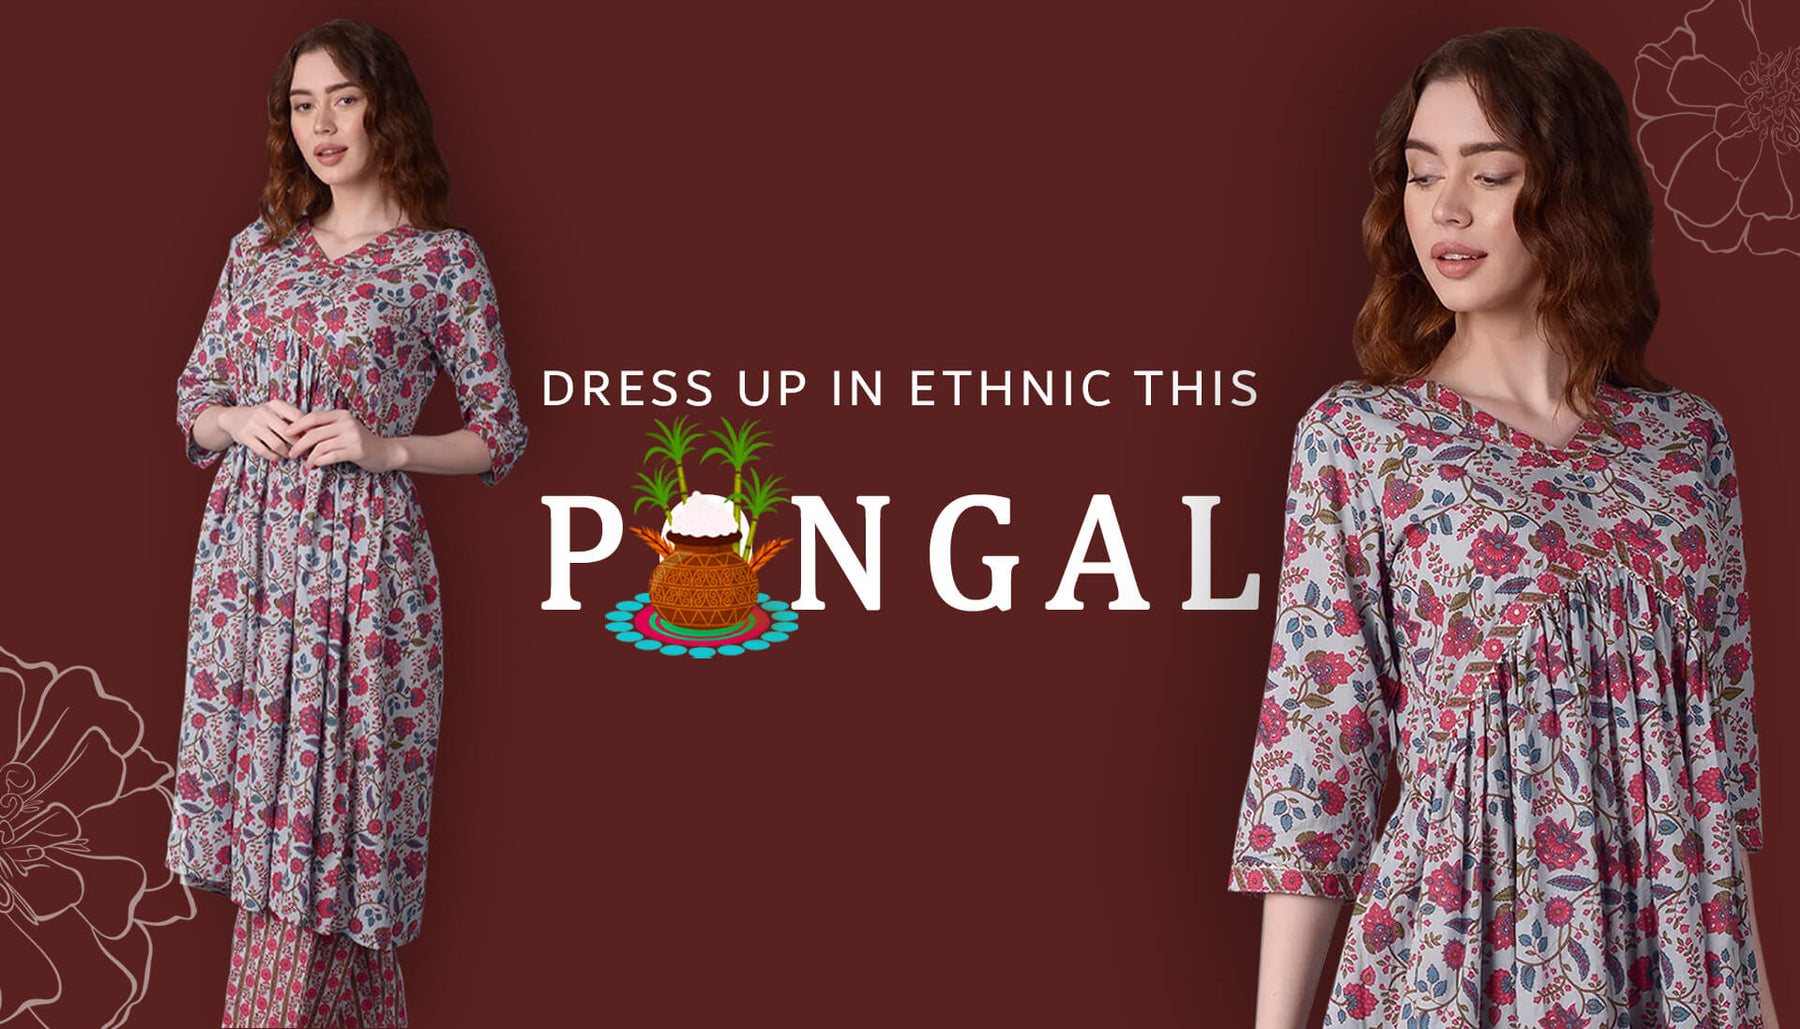 Dress Up in Ethnic this Pongal